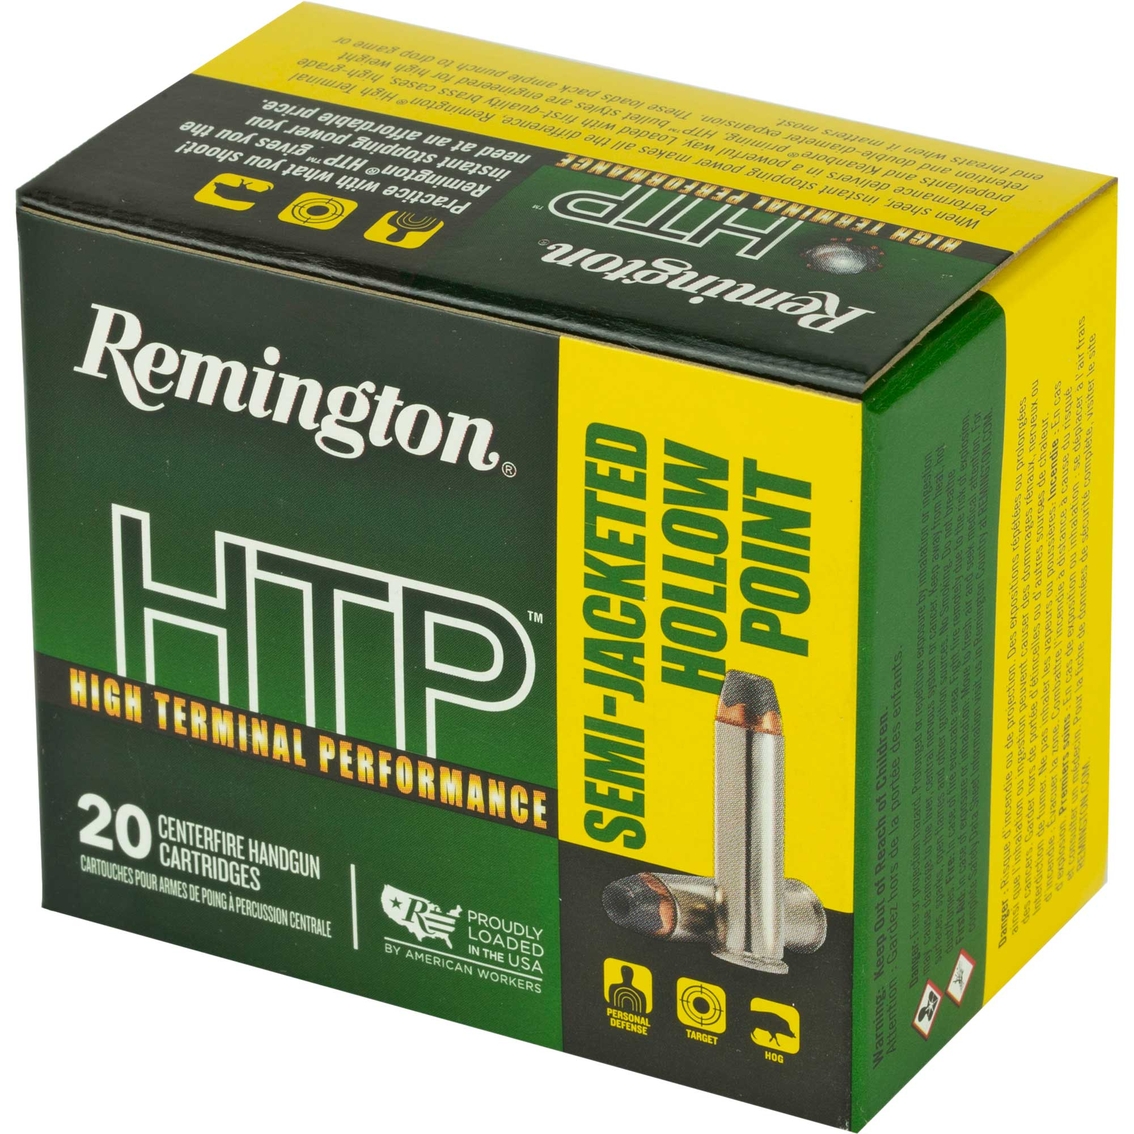 Remington High Terminal Performance .38 Special 125 Gr. Semi-JHP 20 Rounds - Image 2 of 4